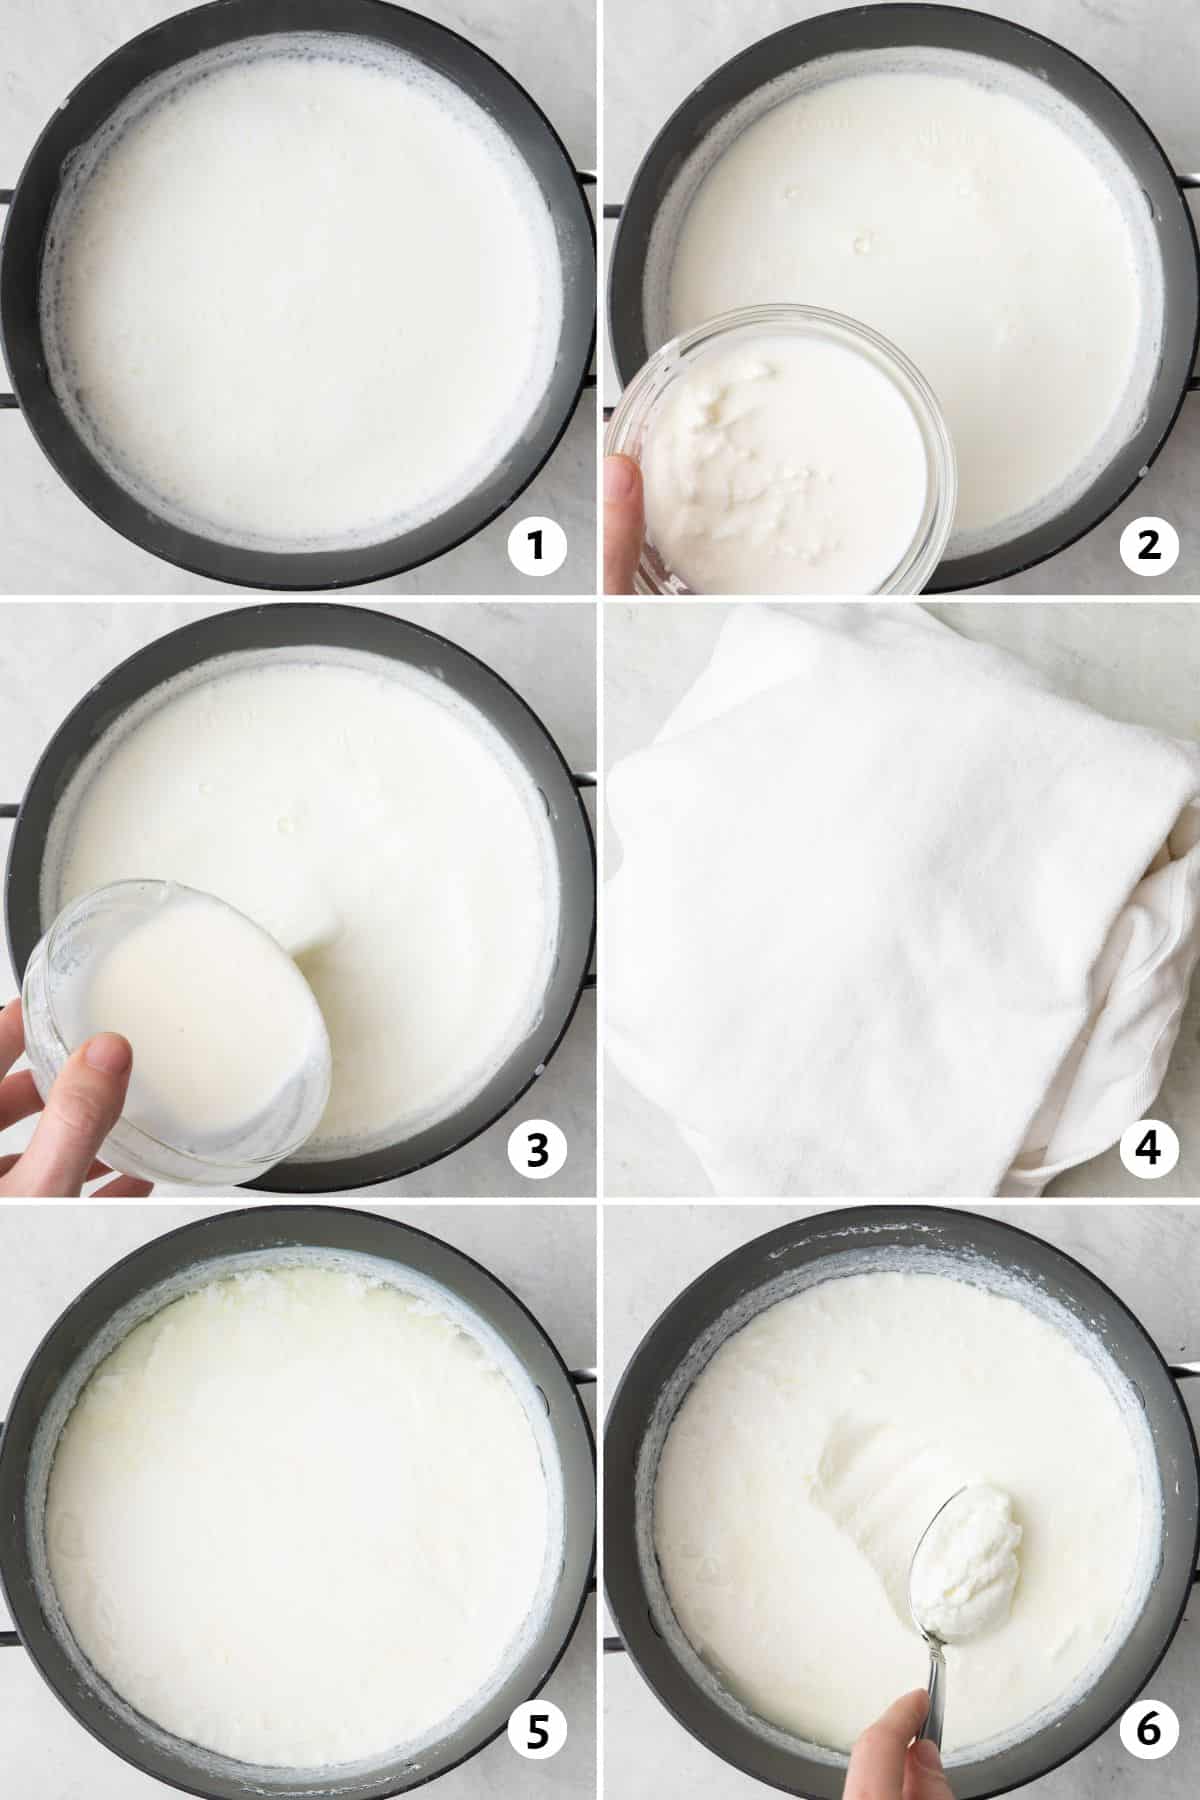 6 image collage making recipe: 1- milk in a pot after heating, 2- hand holding a small bowl over milk with cooled milk and yogurt, 3- pouring mixture into warmed milk, 4- towels wrapped around pot, 5- yogurt mixture before refrigerating after sitting at room temperature for 8 hours, 6- spoon scooping up yogurt to show consistency.